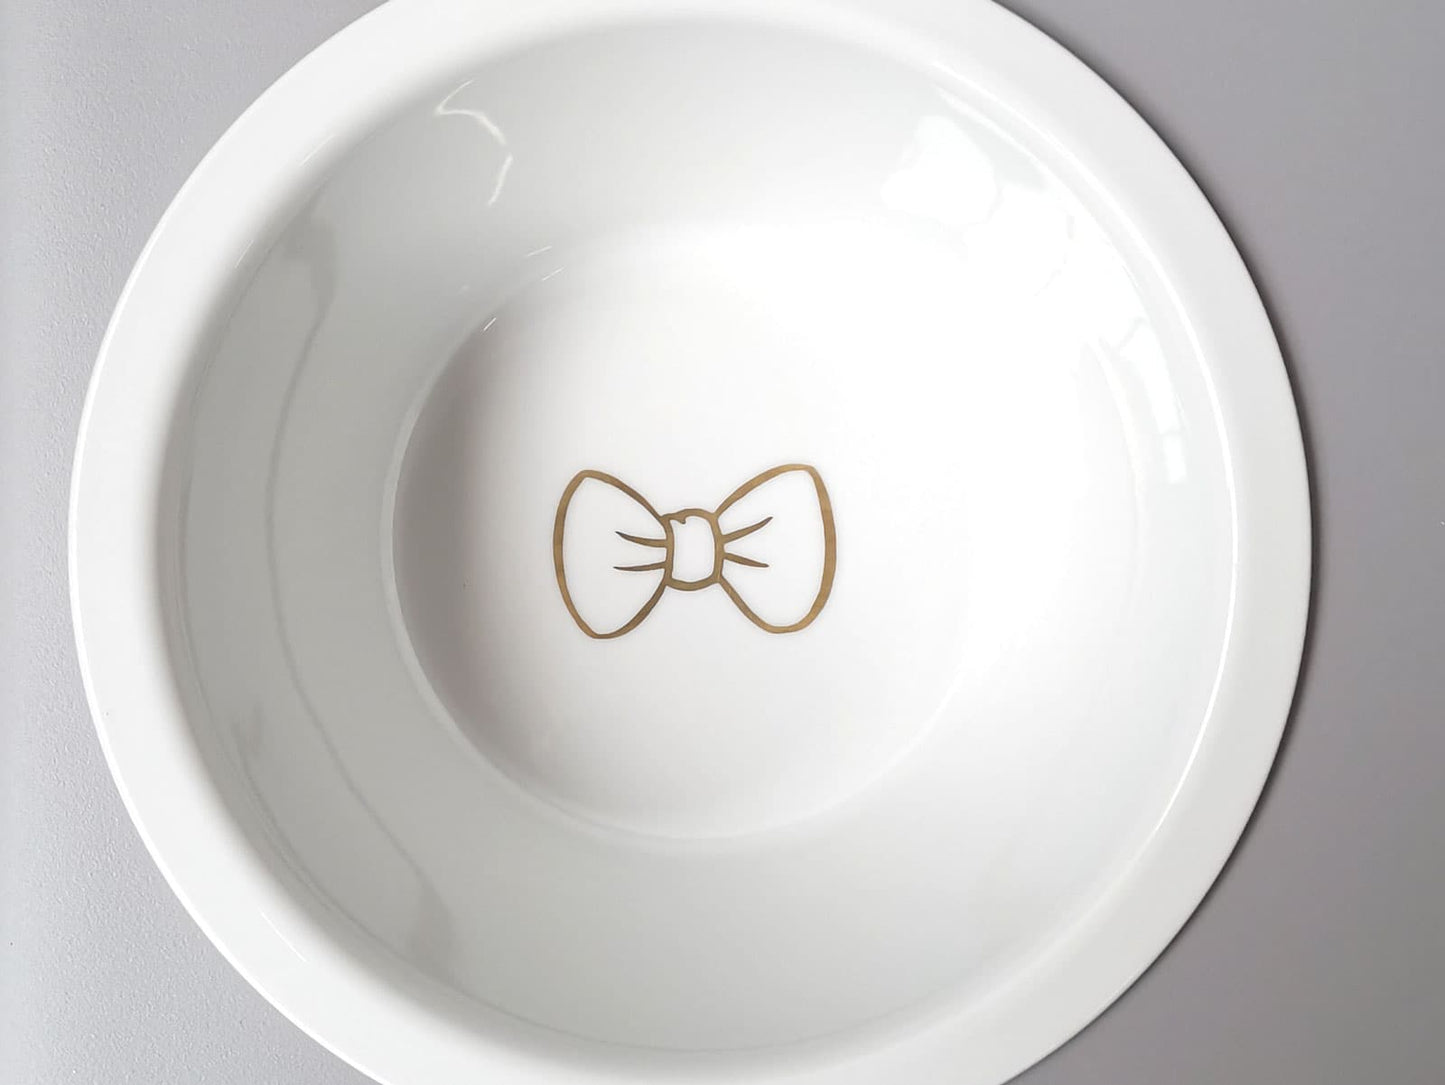 Surcharge personalization for a porcelain bowl of the dogBar® L